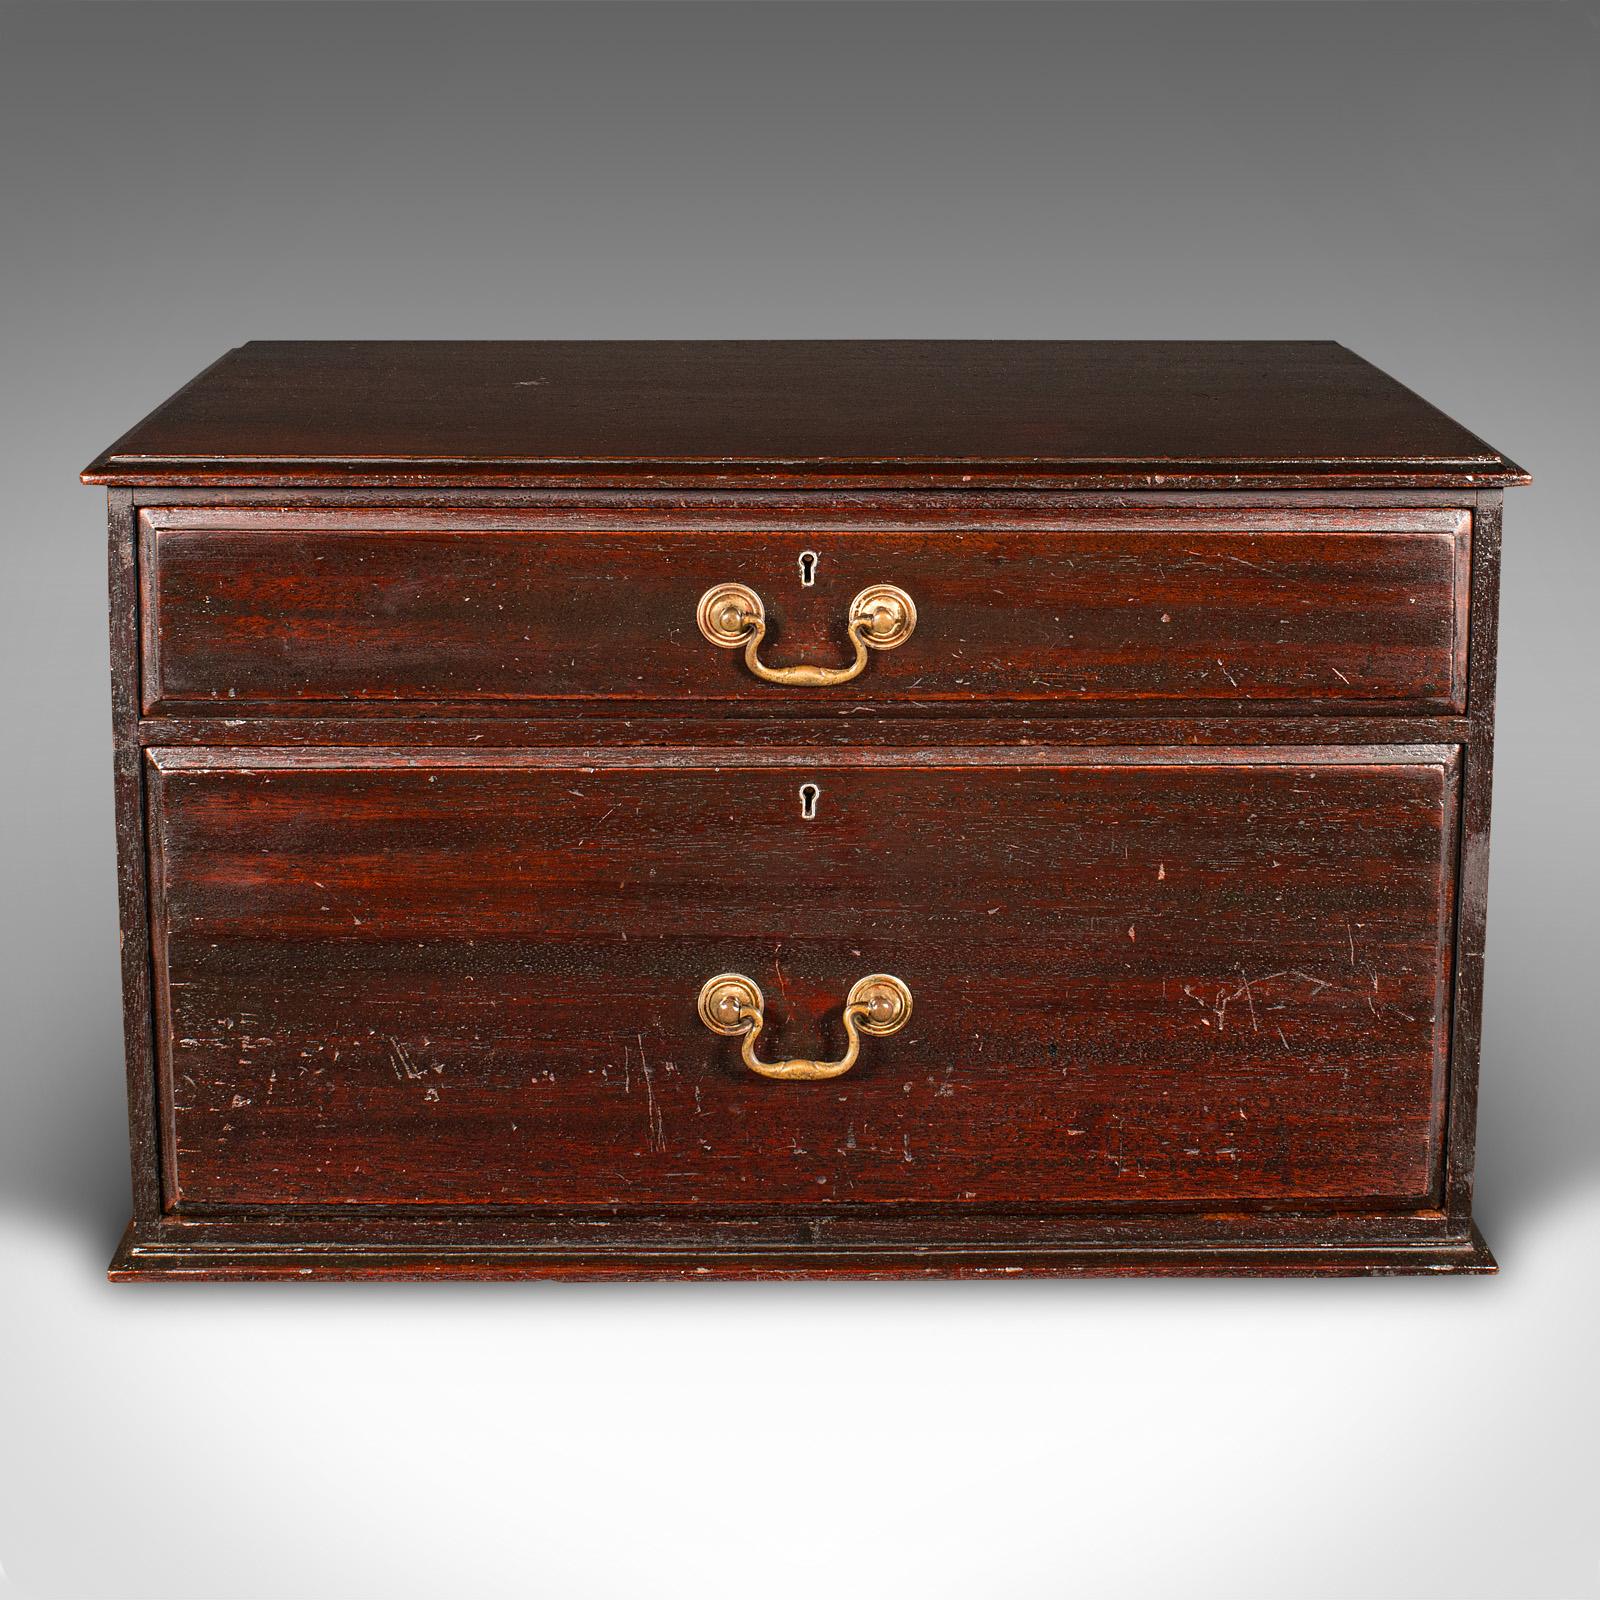 This is an antique watchmaker's cabinet. An English, mahogany two drawer work chest, dating to the mid Victorian period, circa 1860.

Appealingly original presentation with a pair of useful drawers
Displays a desirable aged patina with a lightly